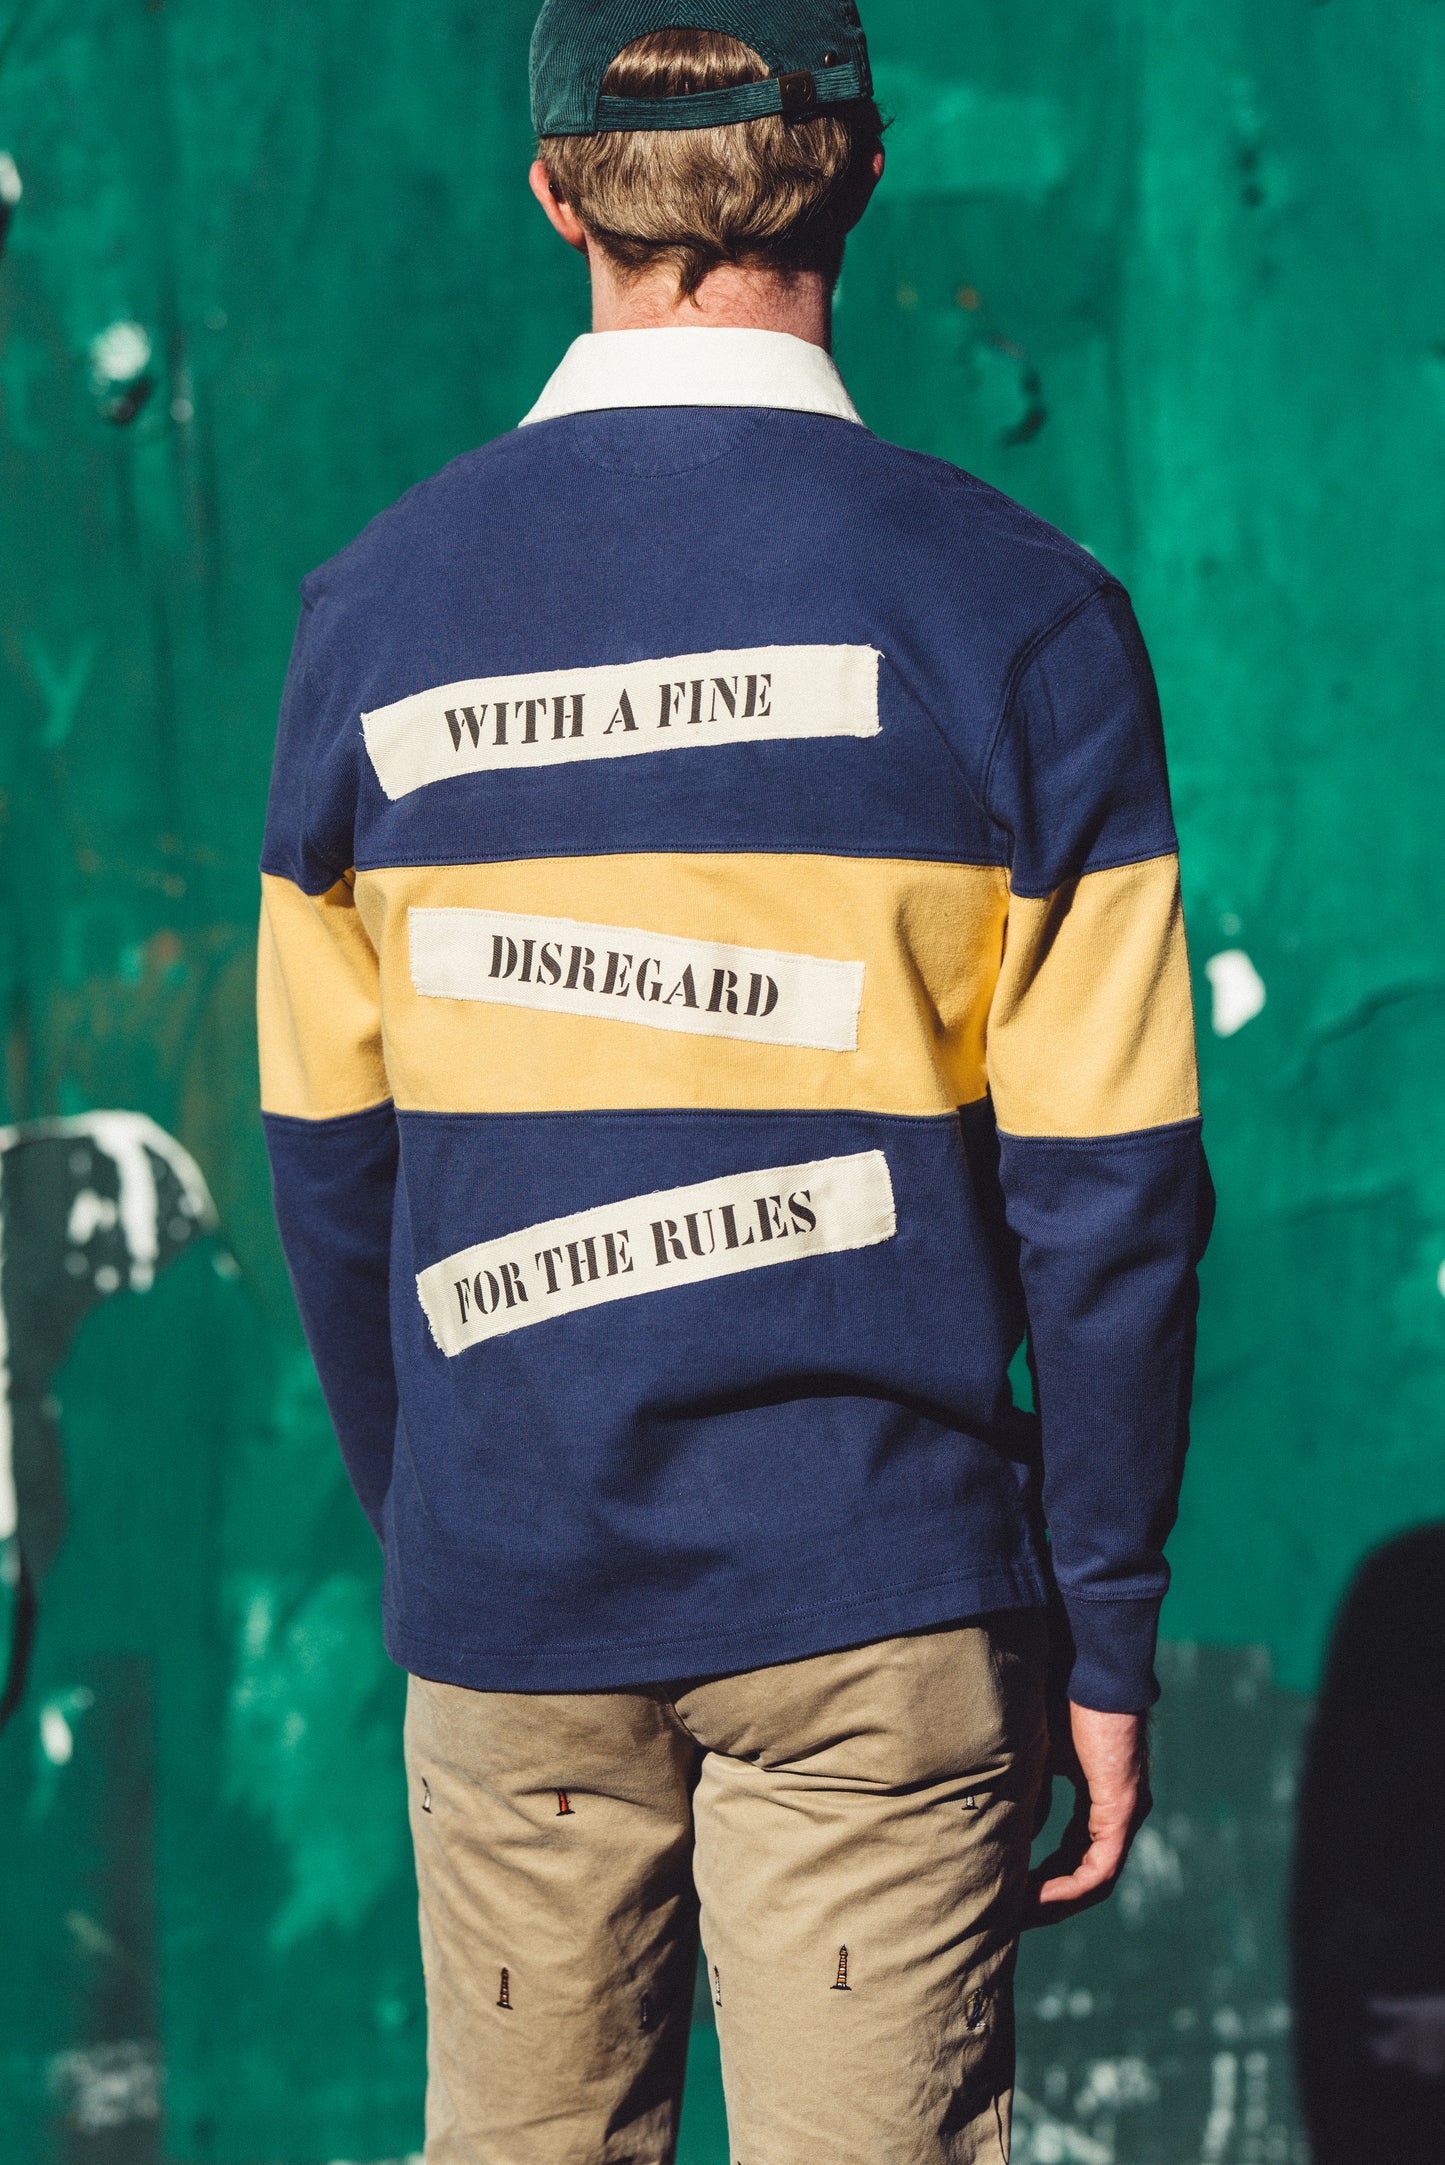 Rowing Blazers X J. Crew Rugby Shirt- Navy and Yellow